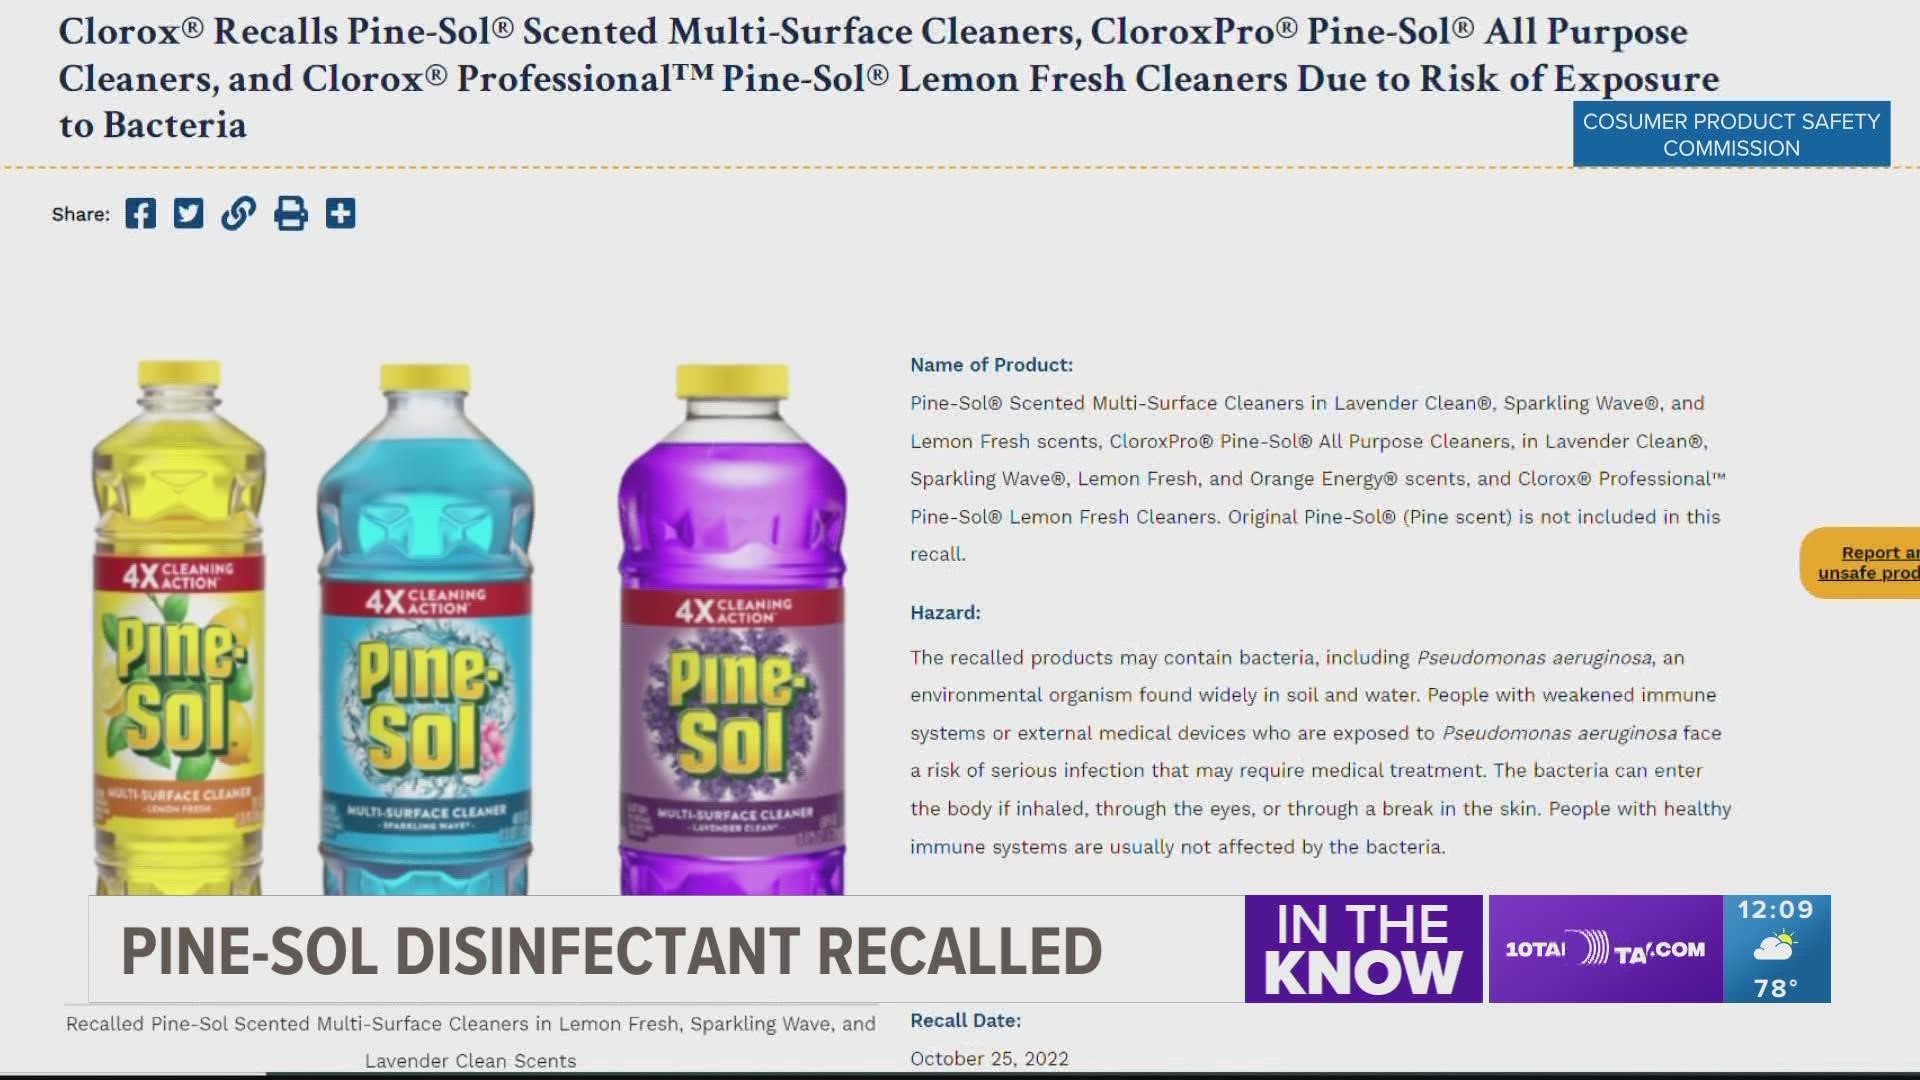 Although no illnesses linked to the recall have been reported, people with weakened immune systems are at greater risk if exposed to the contaminated products.